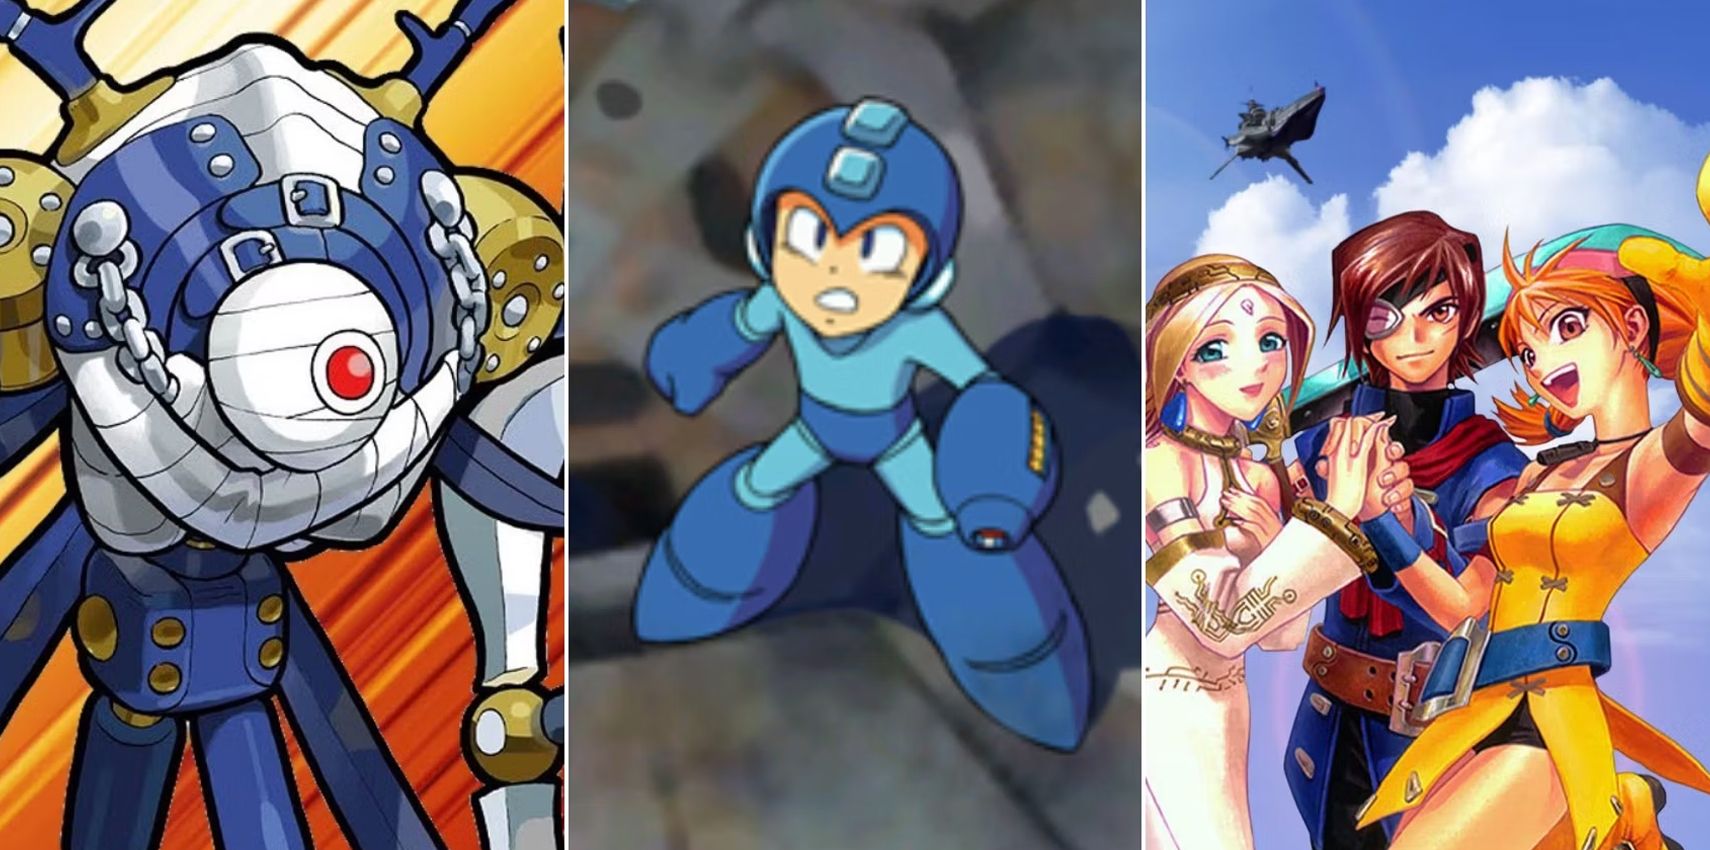 Power Stone 2, Cannon Spike, and Skies of Arcadia